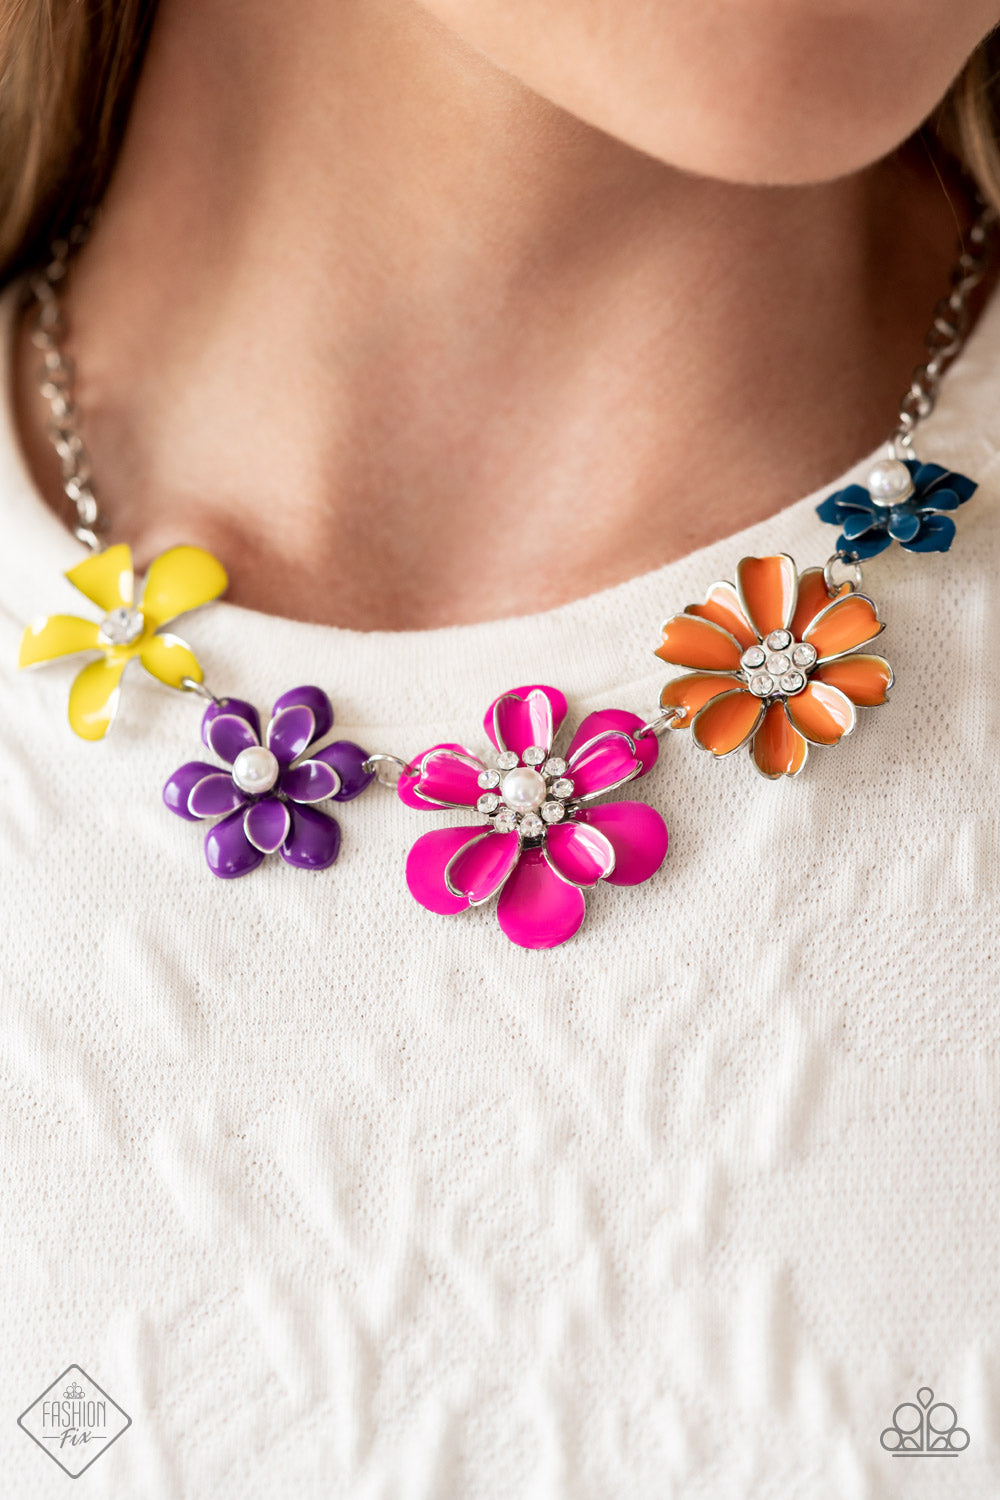 Floral Reverie - Multi Color Flower Necklace - Paparazzi Accessories - Colorful flowers blooms to life along the collar, creating a vibrant statement piece. Each flower features a different centerpiece, flawlessly sprinkling the design with whimsical sparkle and shimmery pearls. Silver edging outlines some of the layered petals, emphasizing the handcrafted character of the design. Features an adjustable clasp closure fashion necklace.